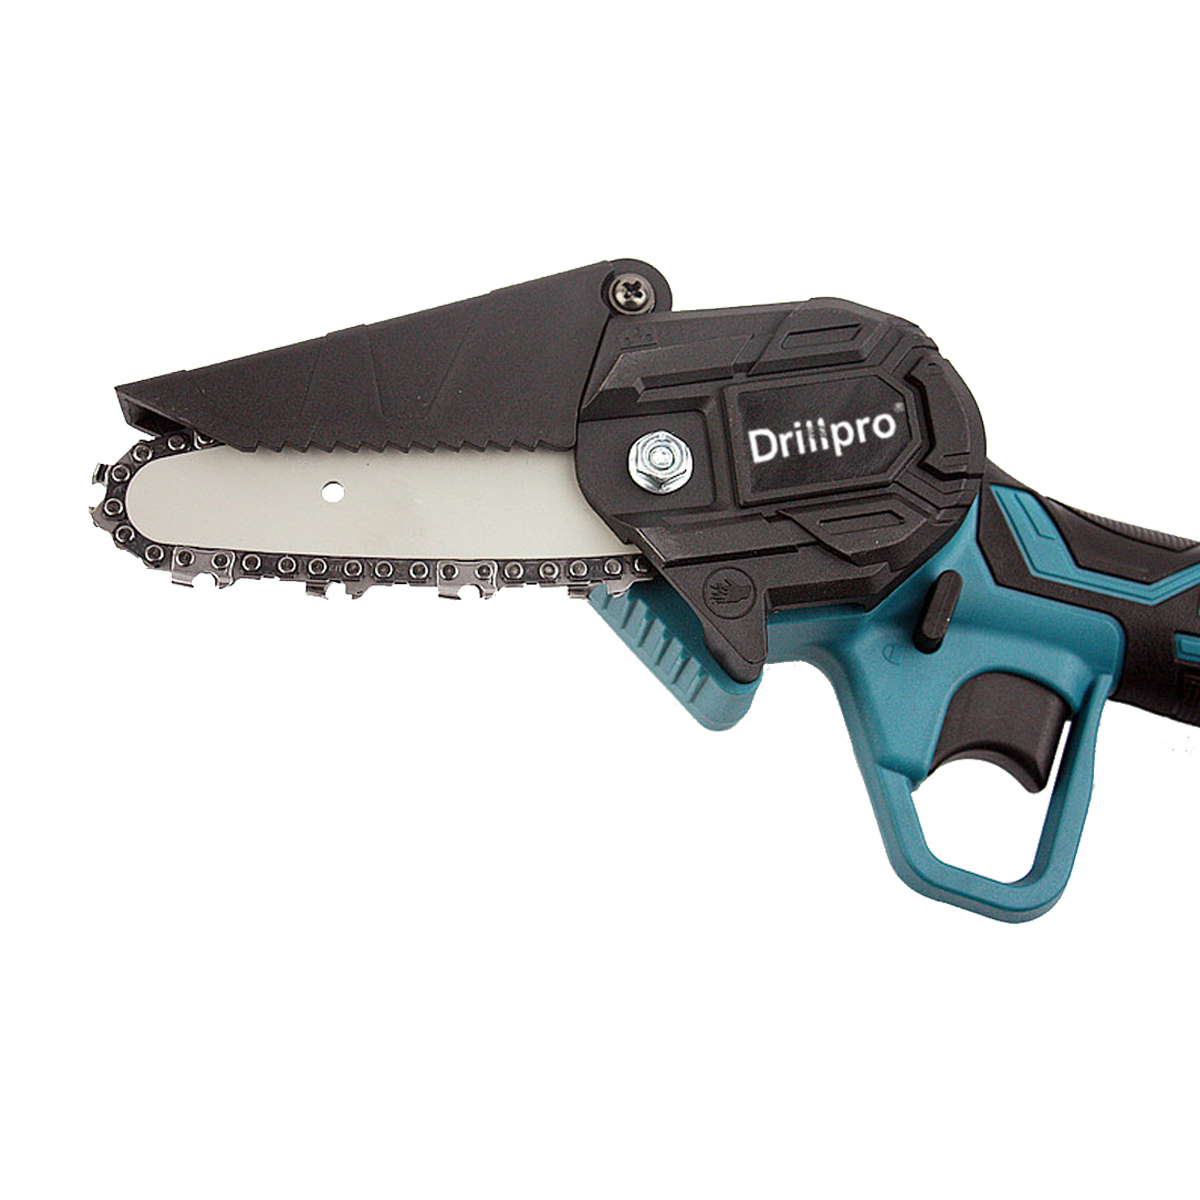 Drillpro-4-Inch-Electric-Chain-Saw-Portable-One-hand-Saw-Wood-Cutter-for-Makita-18V-Battery-1804667-9